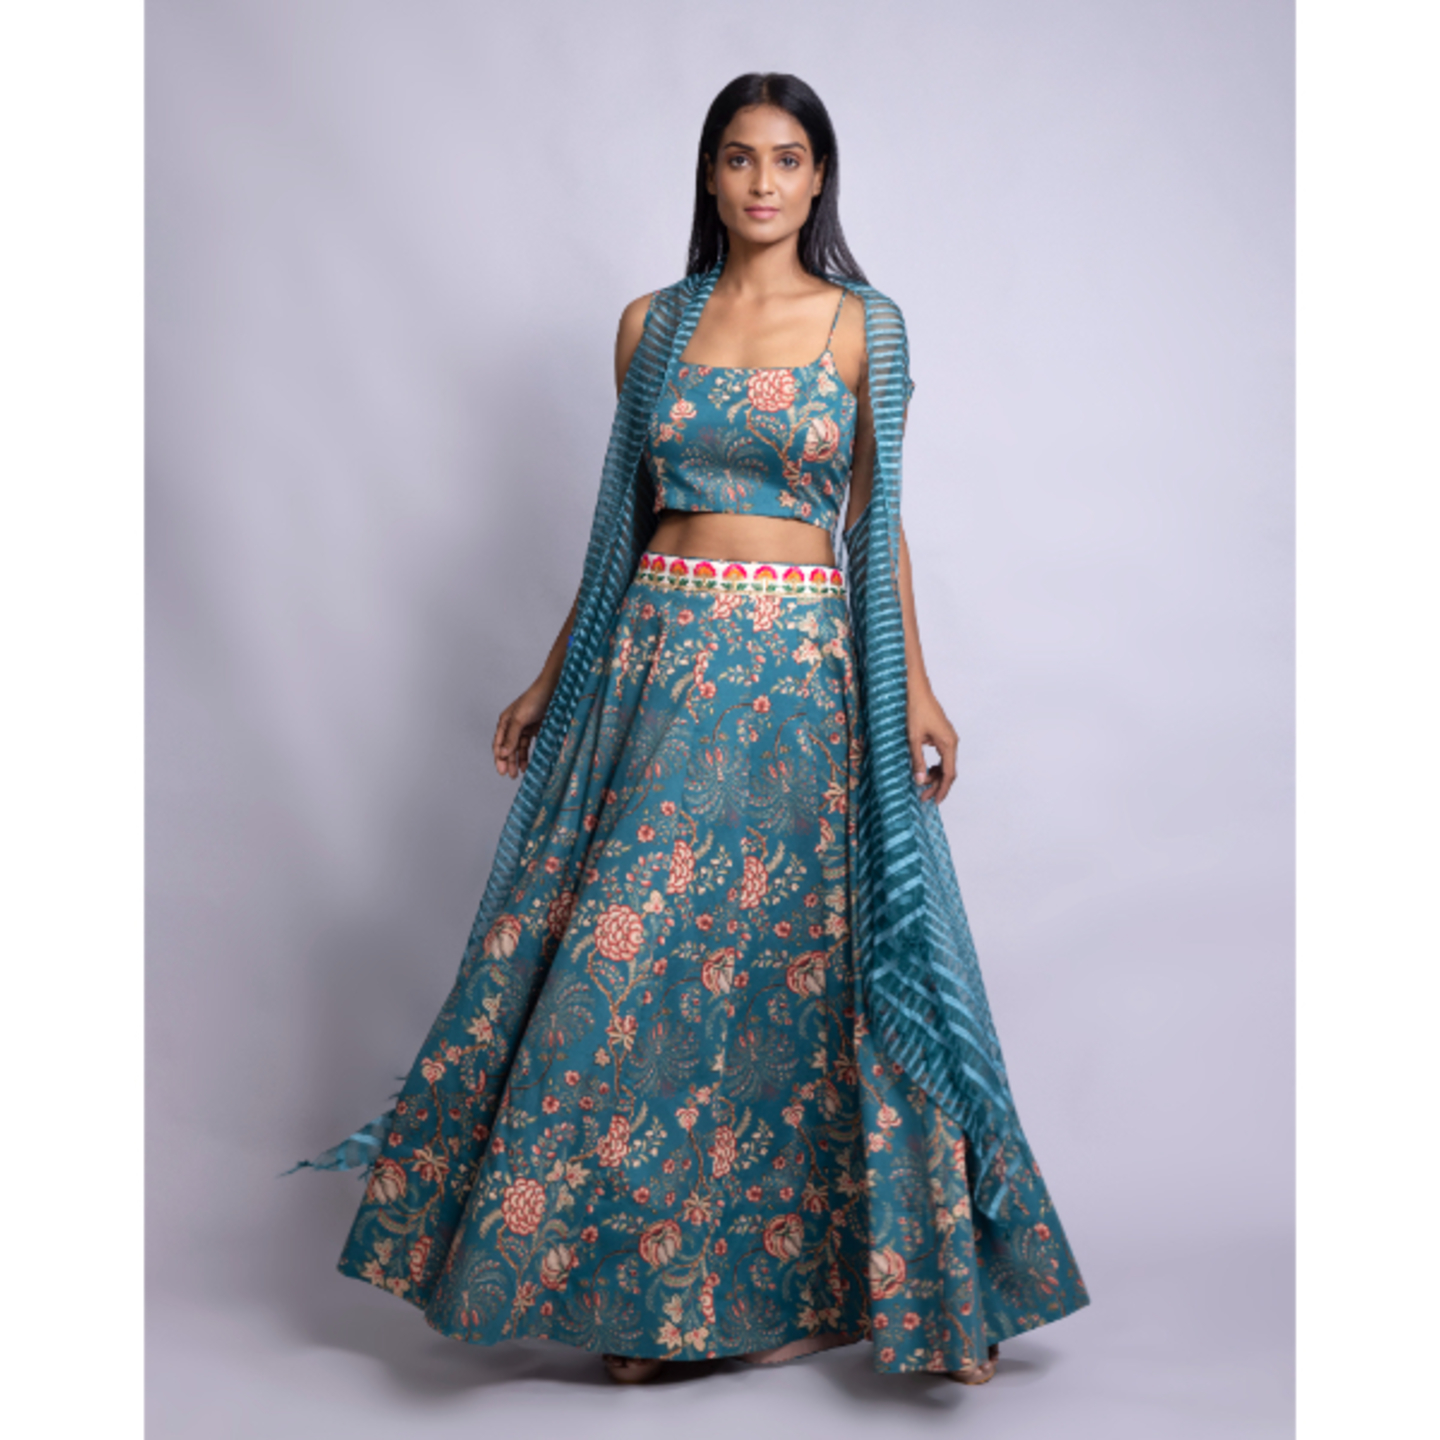 Long Skirt with crop-top and Cape set Stylish TURQUOISE coloured Skirt set.